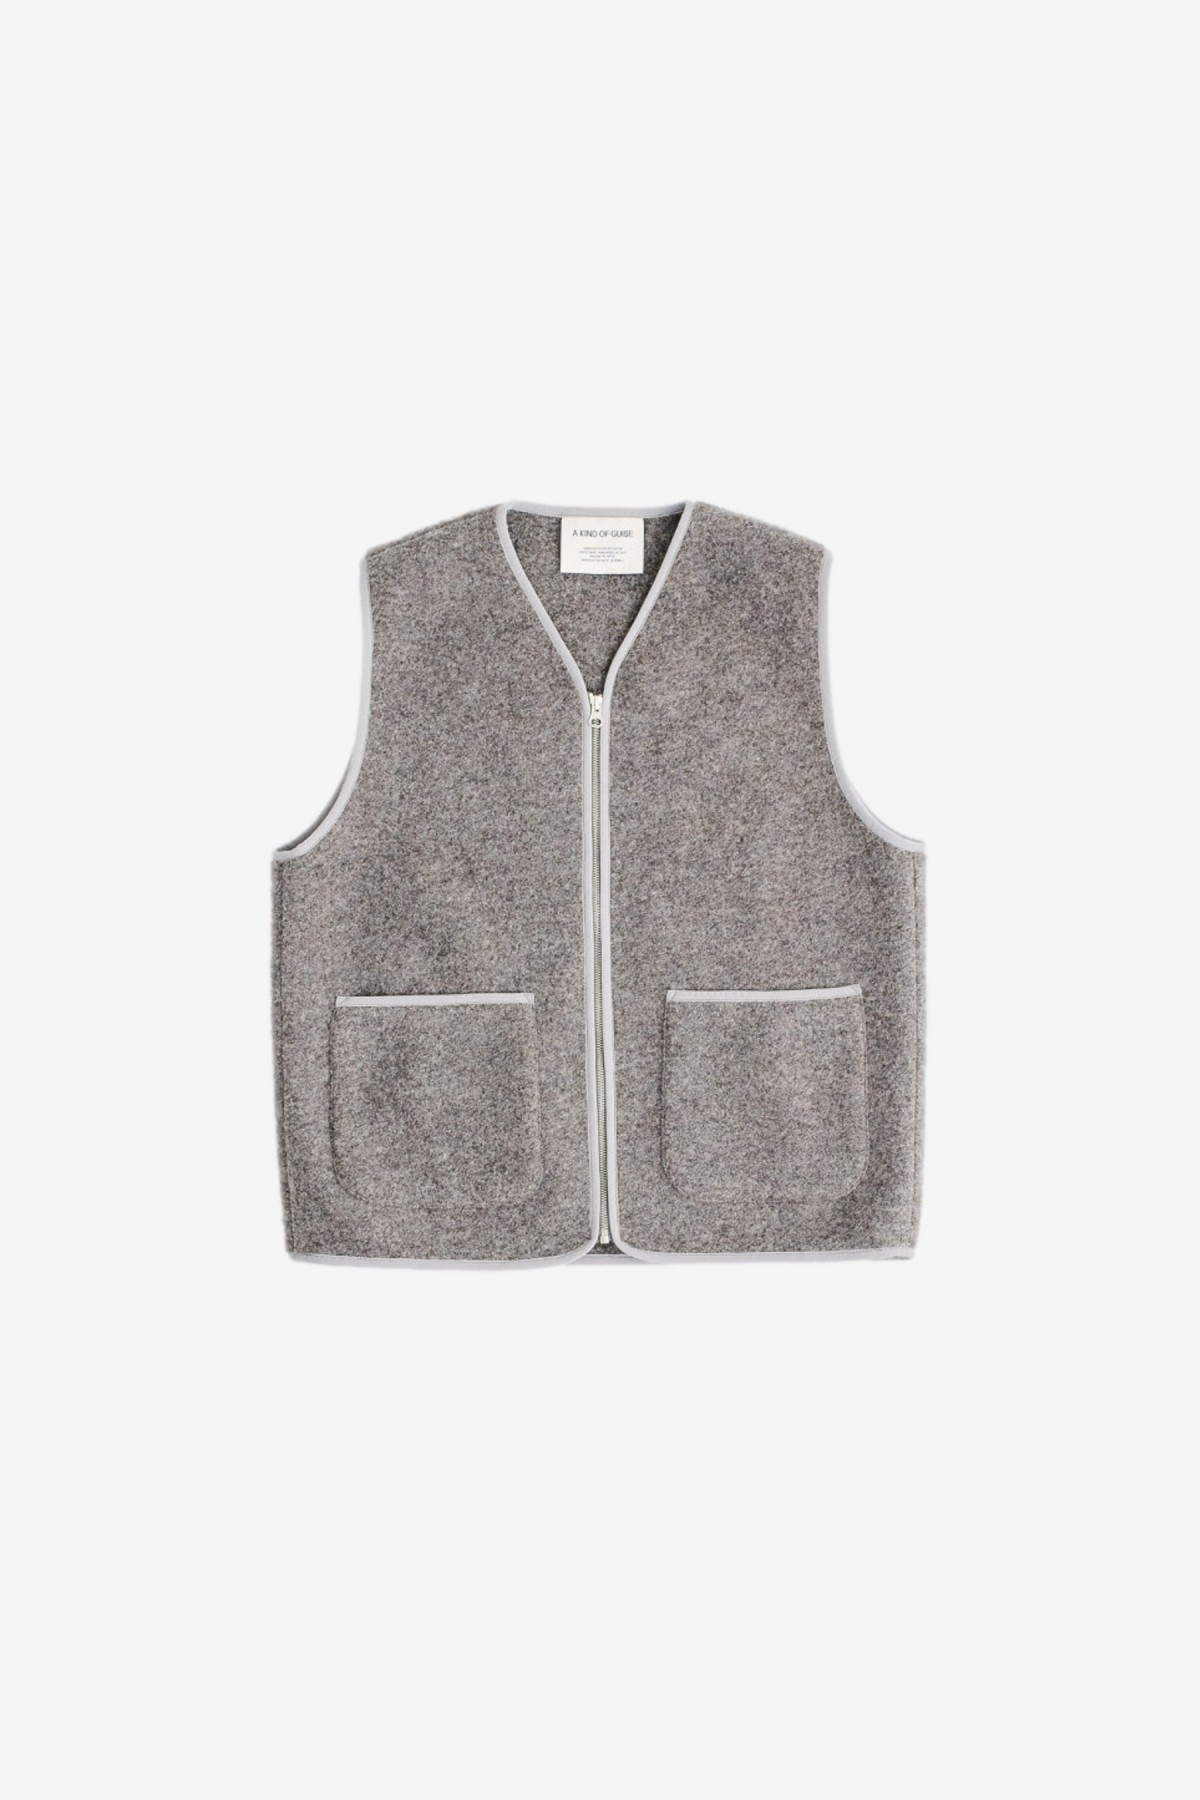 A Kind of Guise Valur Wool Vest in Boiled Grey Wool